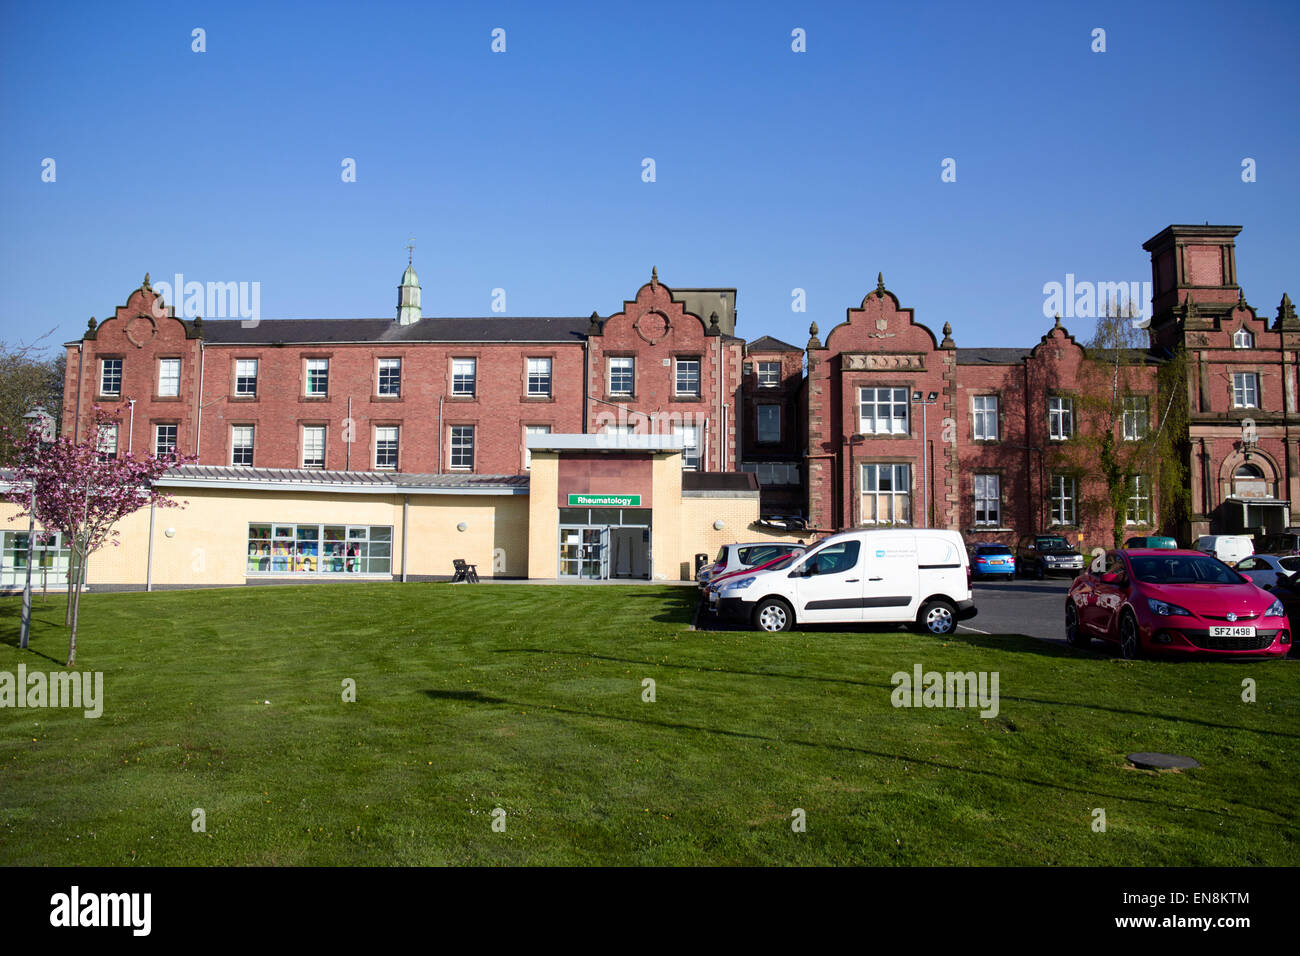 rheumatology department in the old building at Musgrave Park Hospital belfast northern ireland Stock Photo